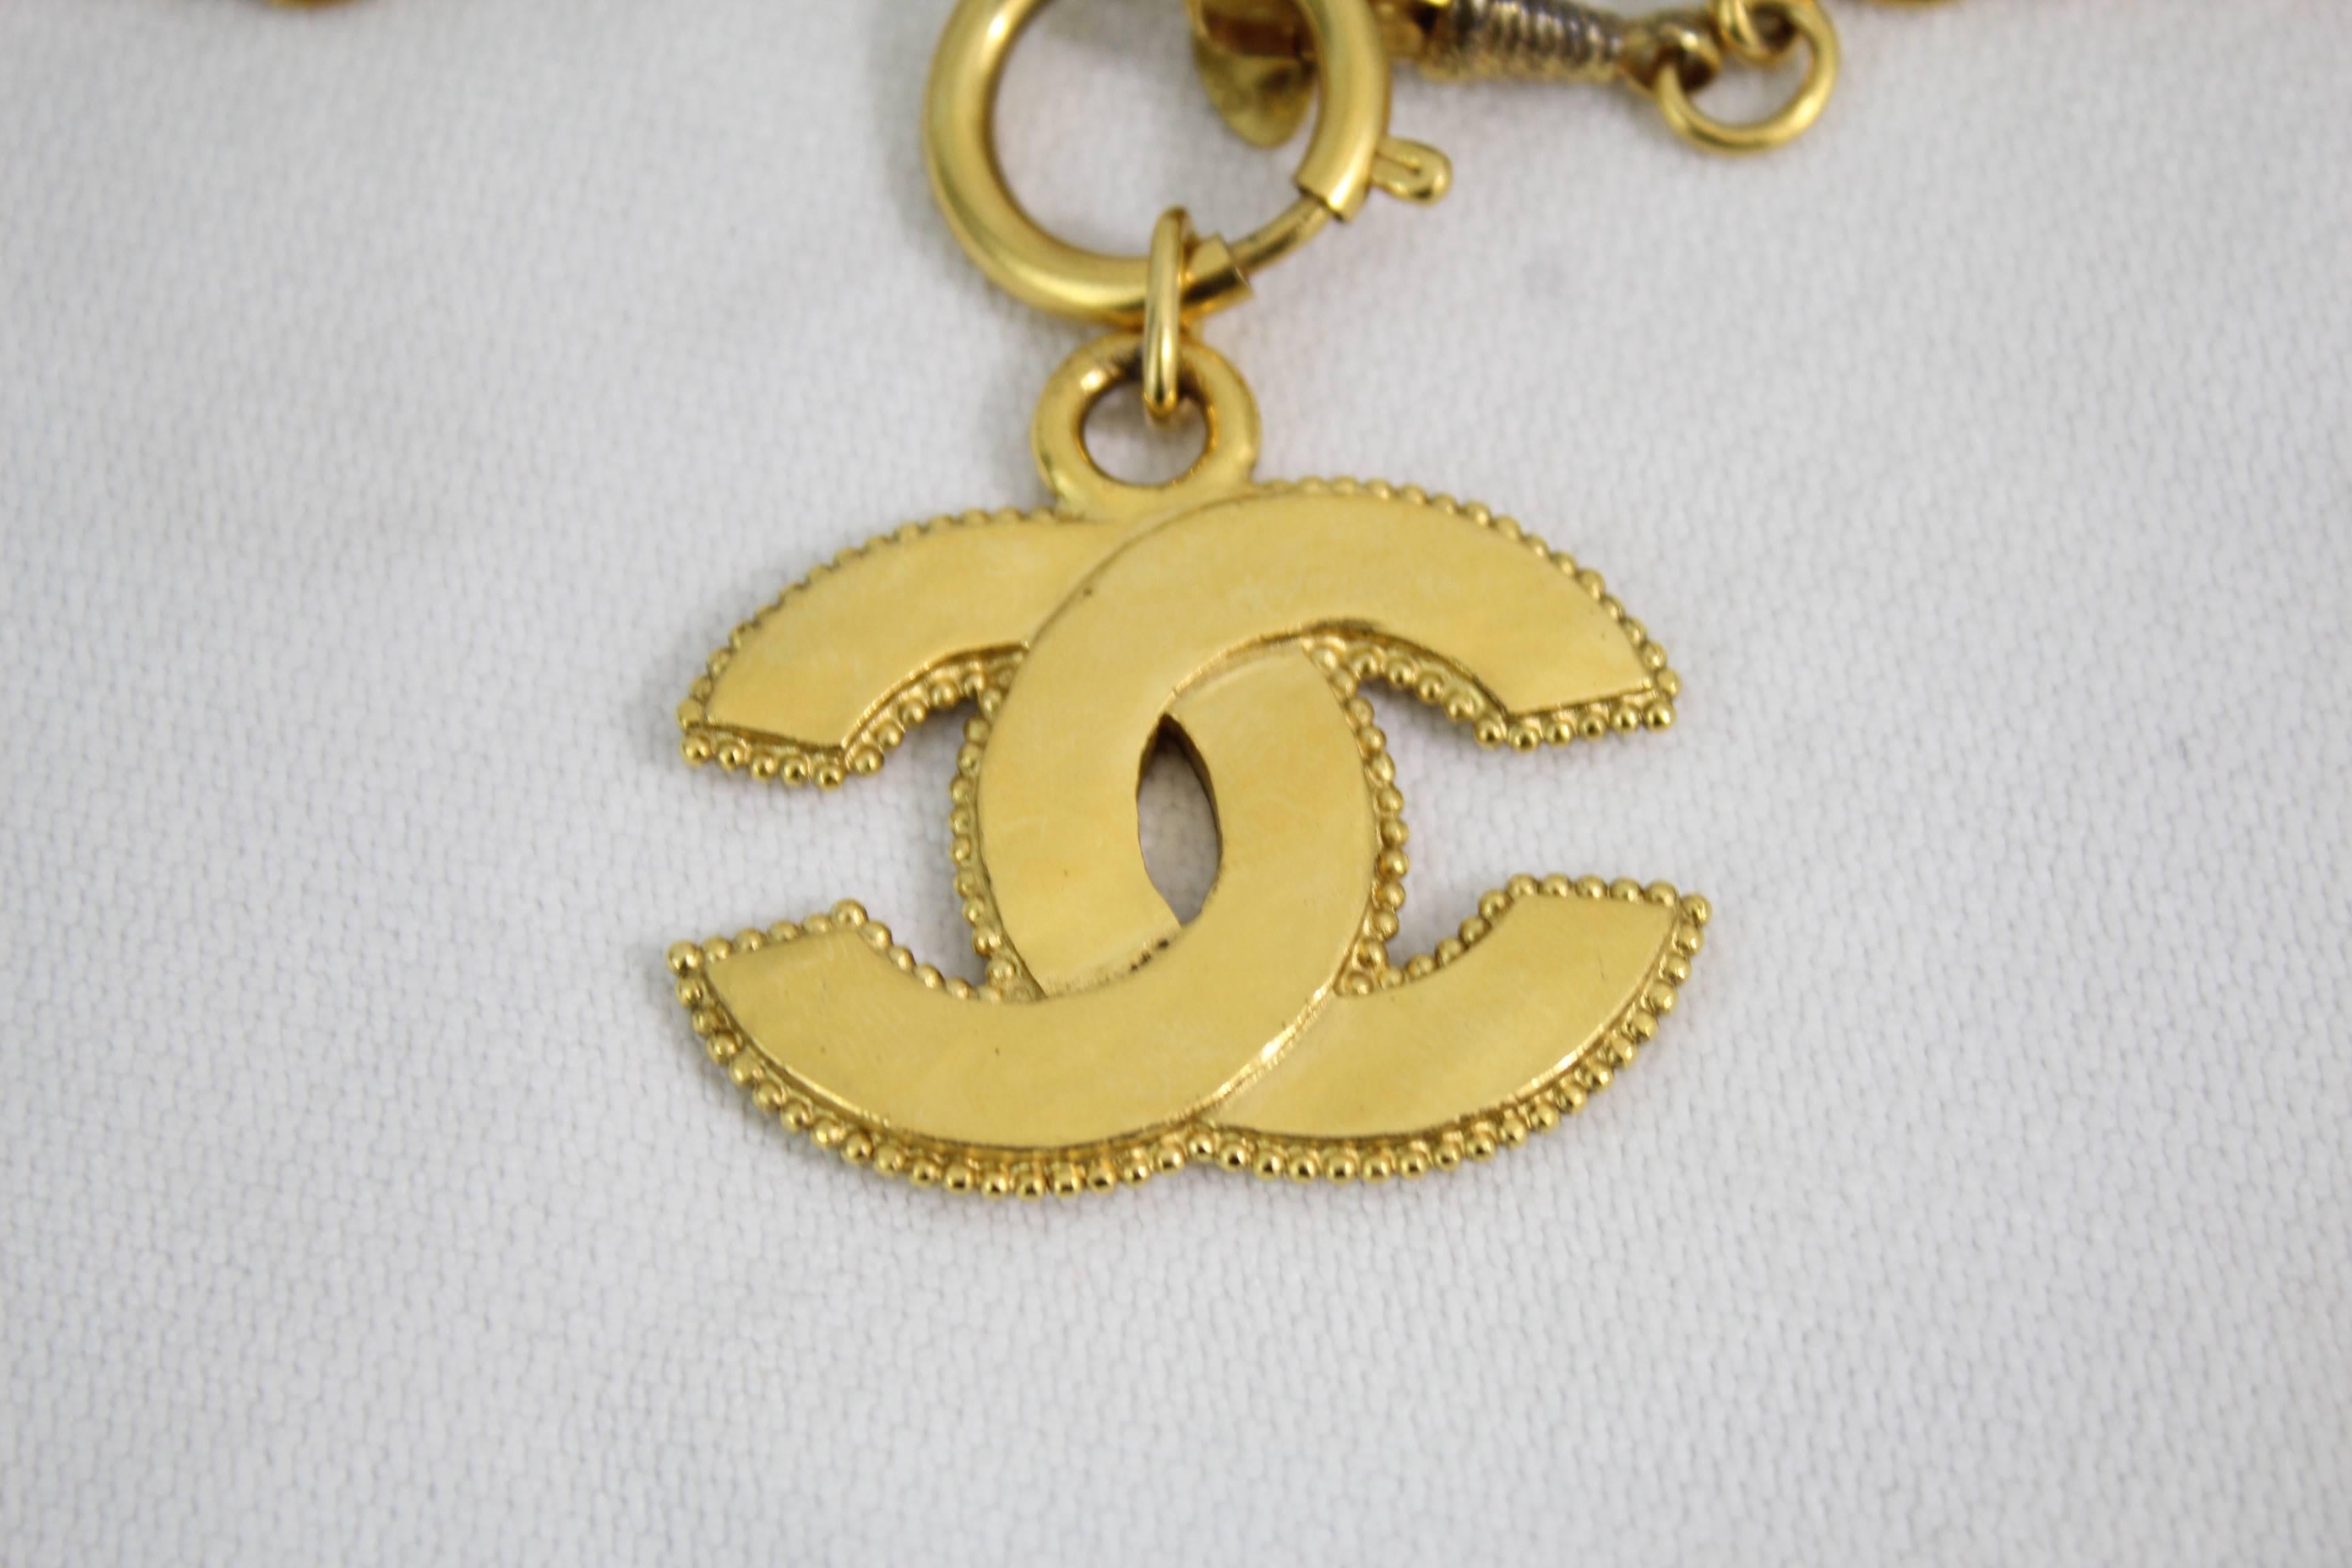 Chanel Golden Metal Double C necklace.

Good condition but some signs of wear overall in the clasp

Logo in good condition

Signed by a plate.